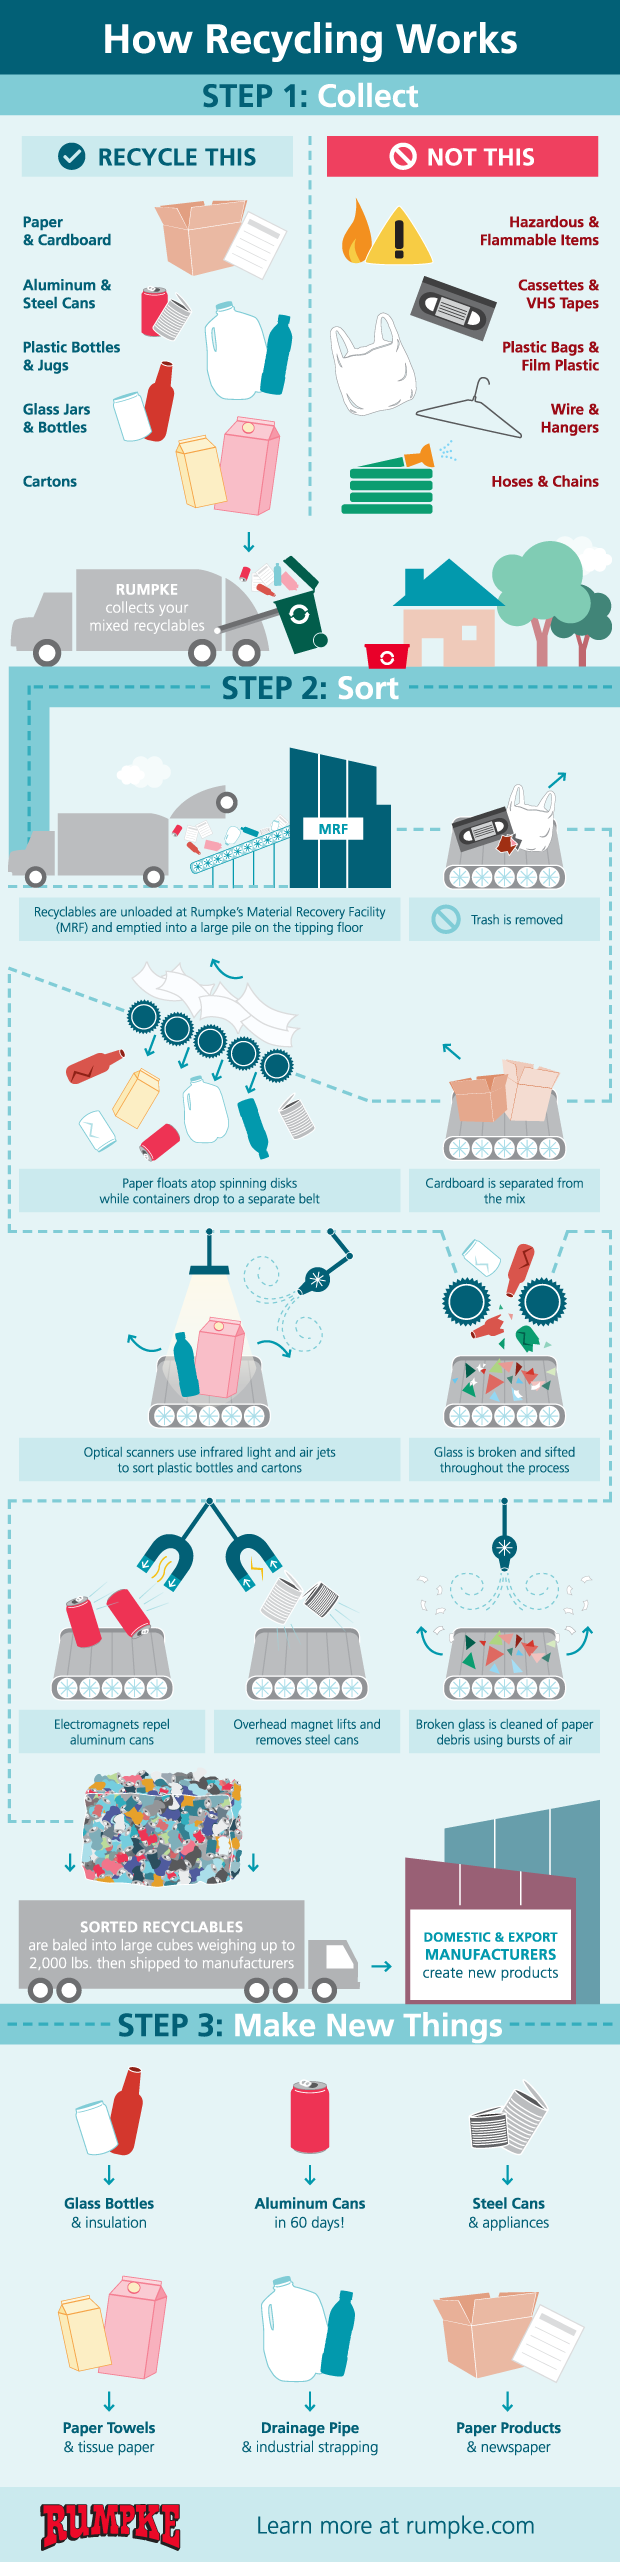 Infographic: How To Recycle